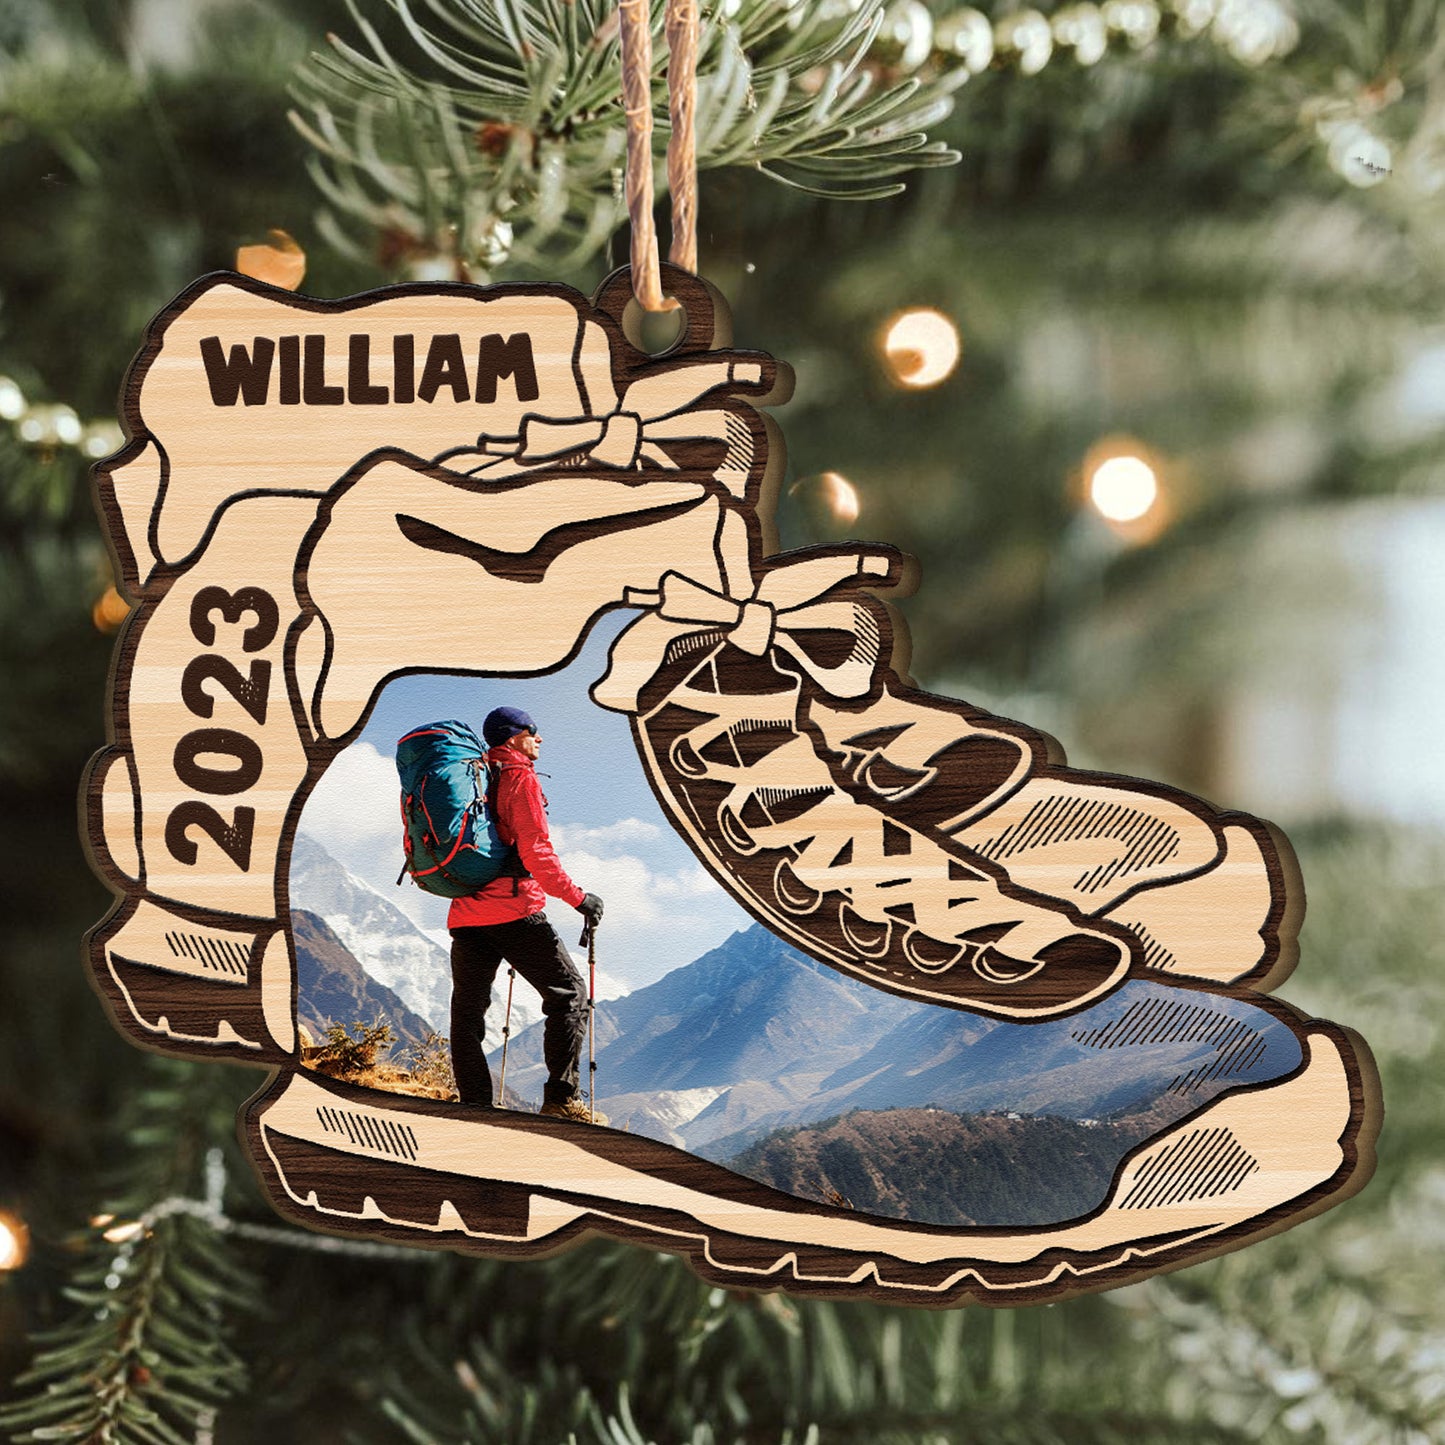 Hiking Boots Ornament - Personalized Wooden Photo Ornament